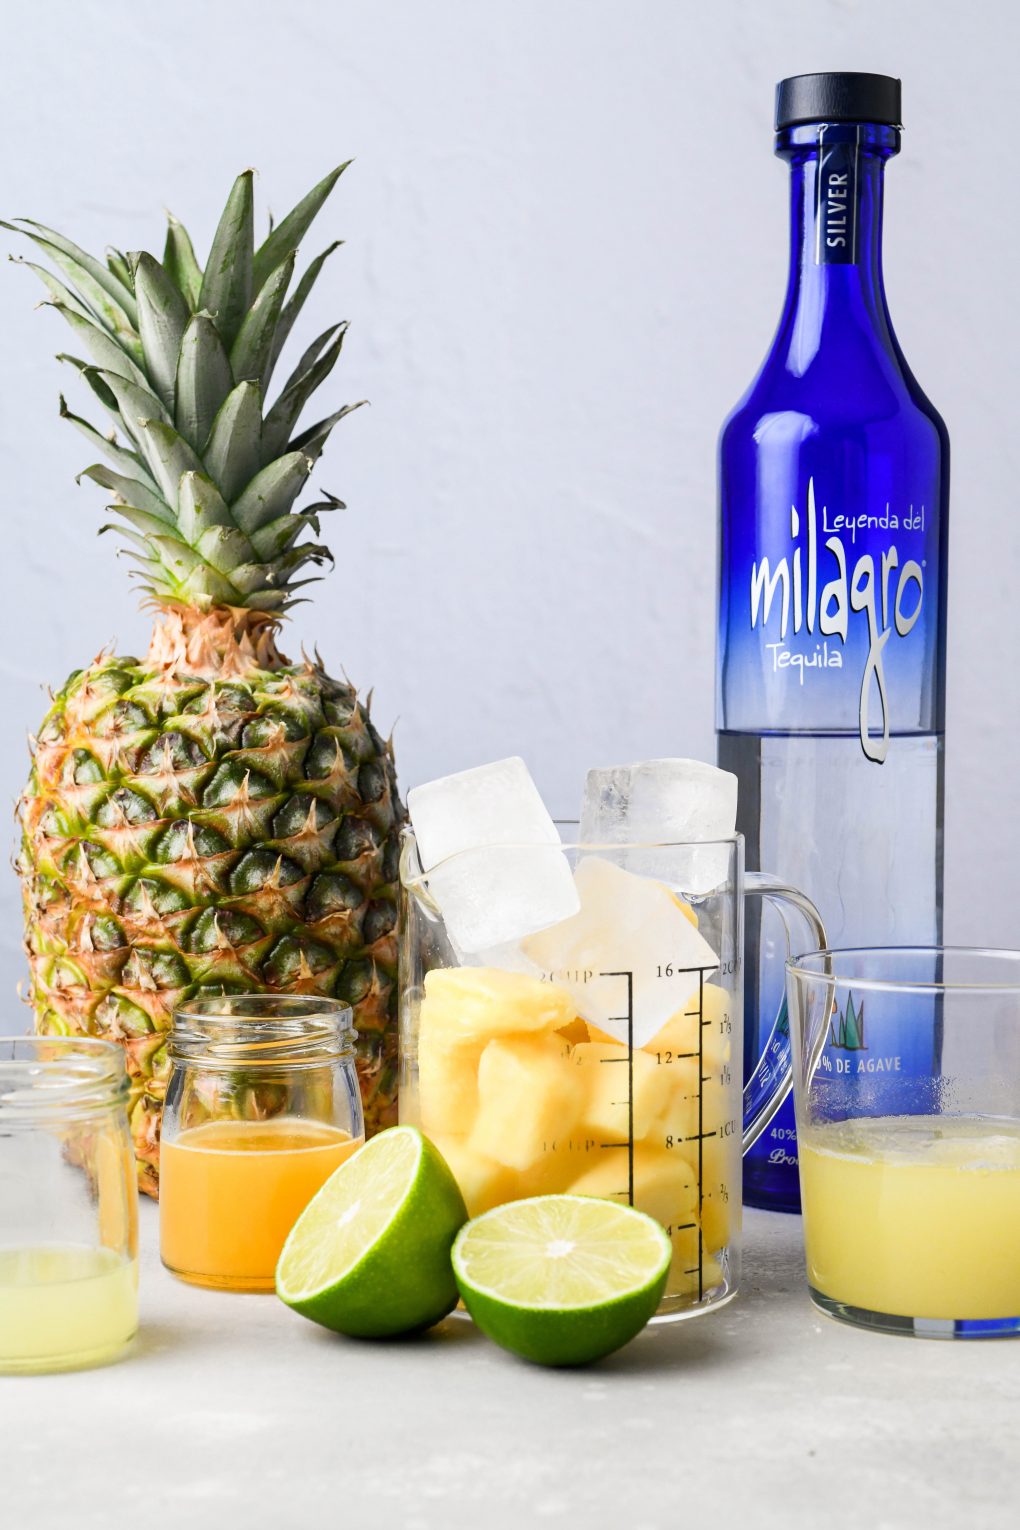 Straight on image of ingredients for pineapple margaritas - a fresh pineapple, frozen pinapple, ice cubes, fresh fruit juices, and blanco tequila. On a light colored background.